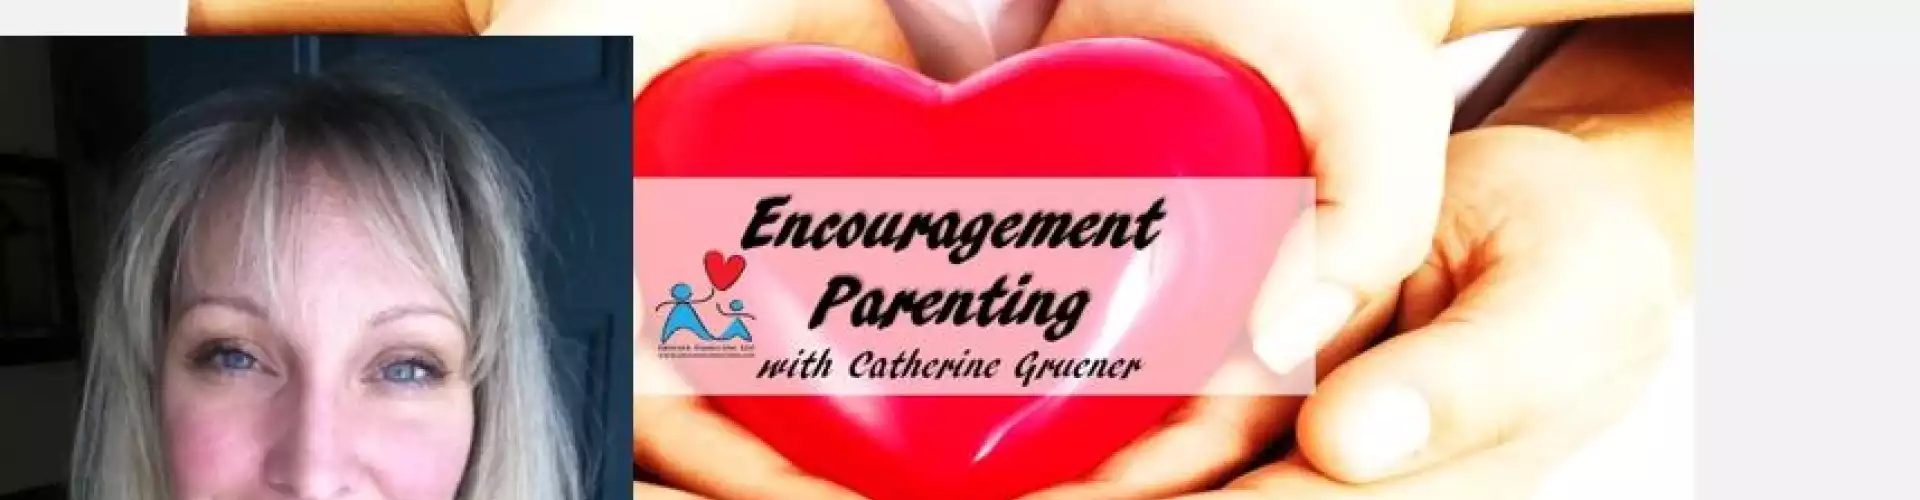 Parenting Young Gifted Children with Encouragement Parenting